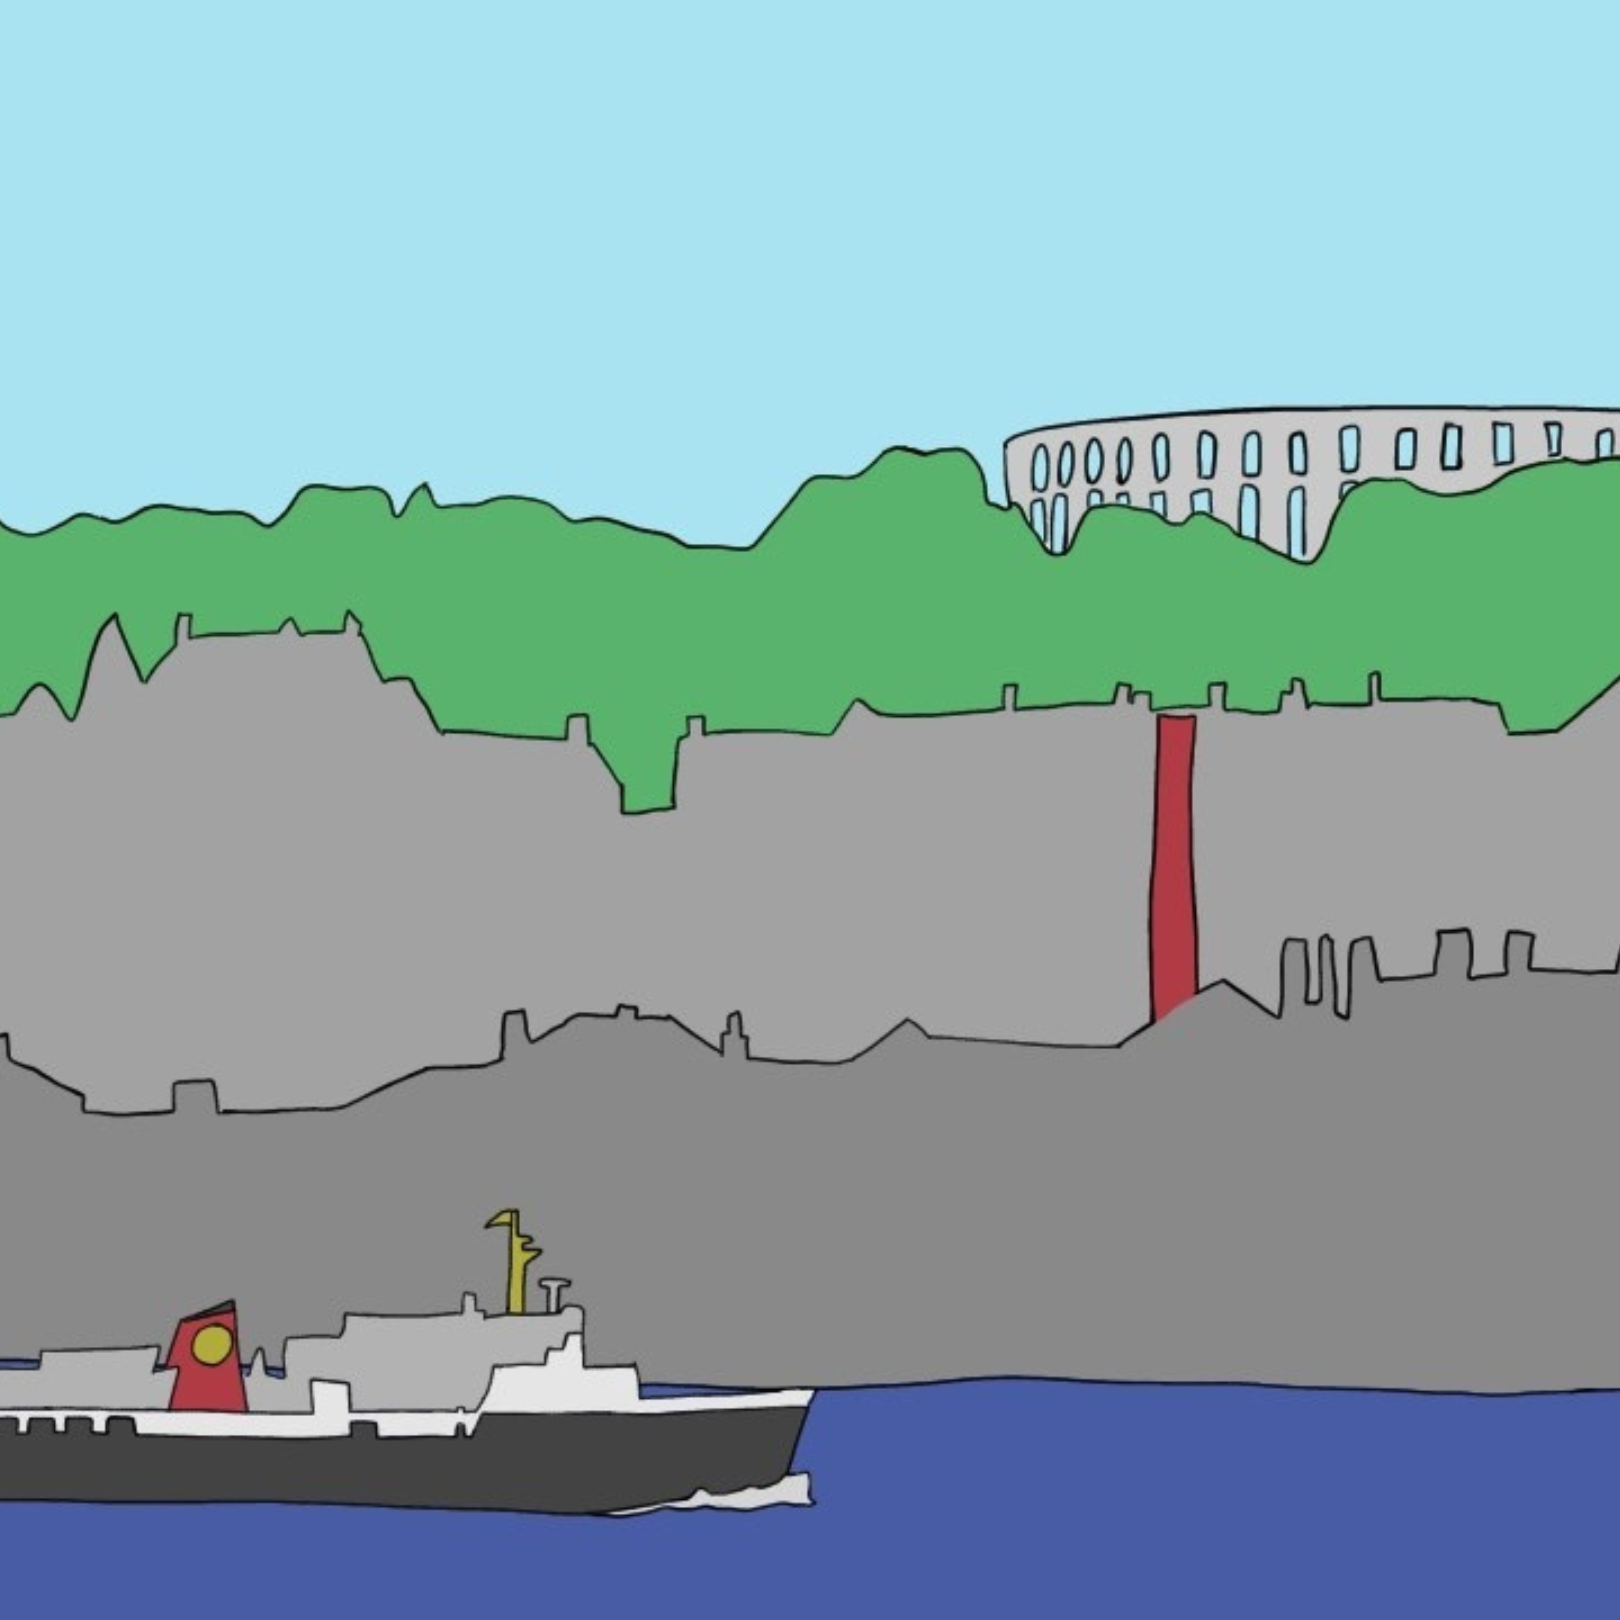 A graphic illustration of Oban, with a ship sailing past building, such as McCraig's Tower, and greenery.